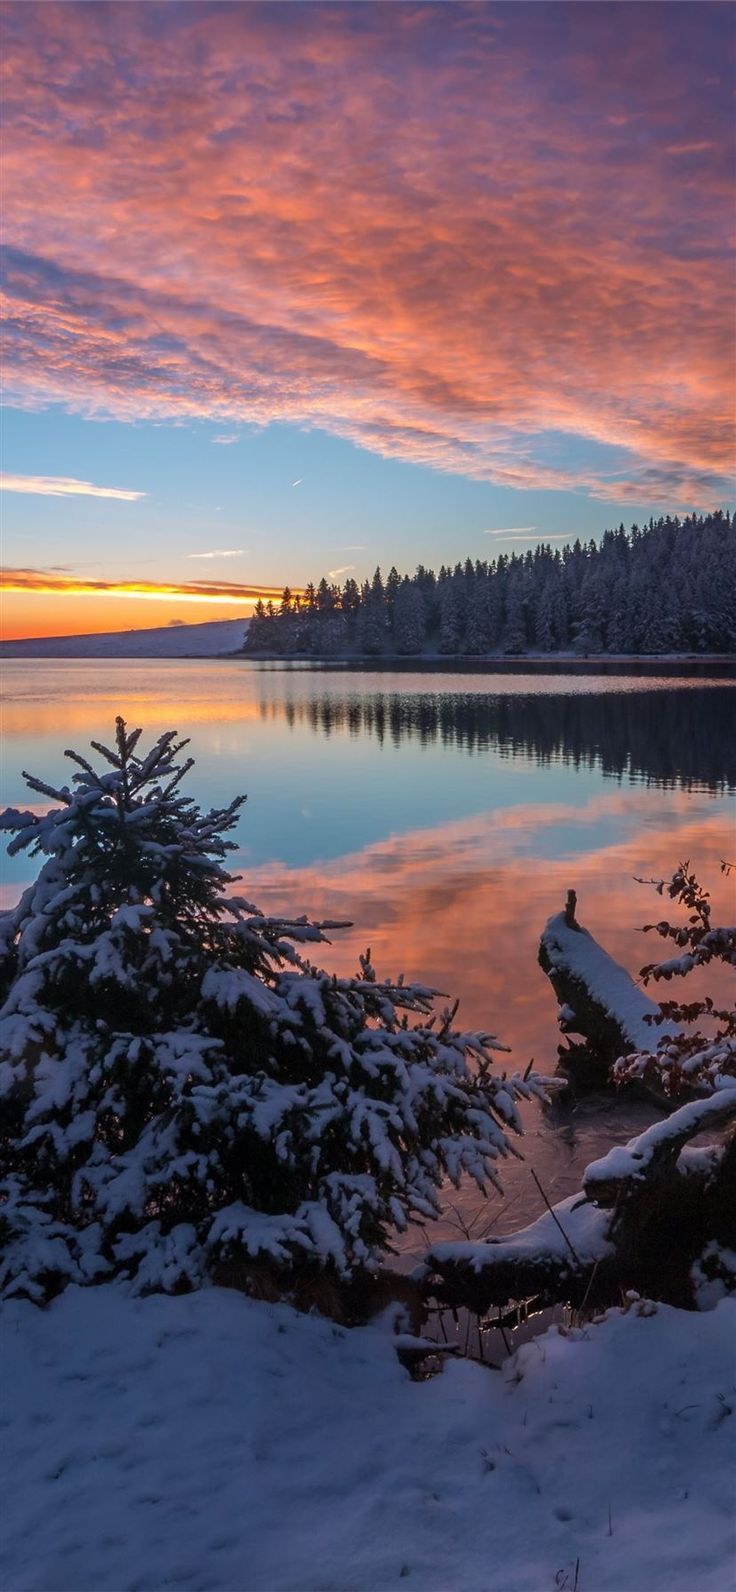 A snowy lake at sunset with trees in the background - Lake